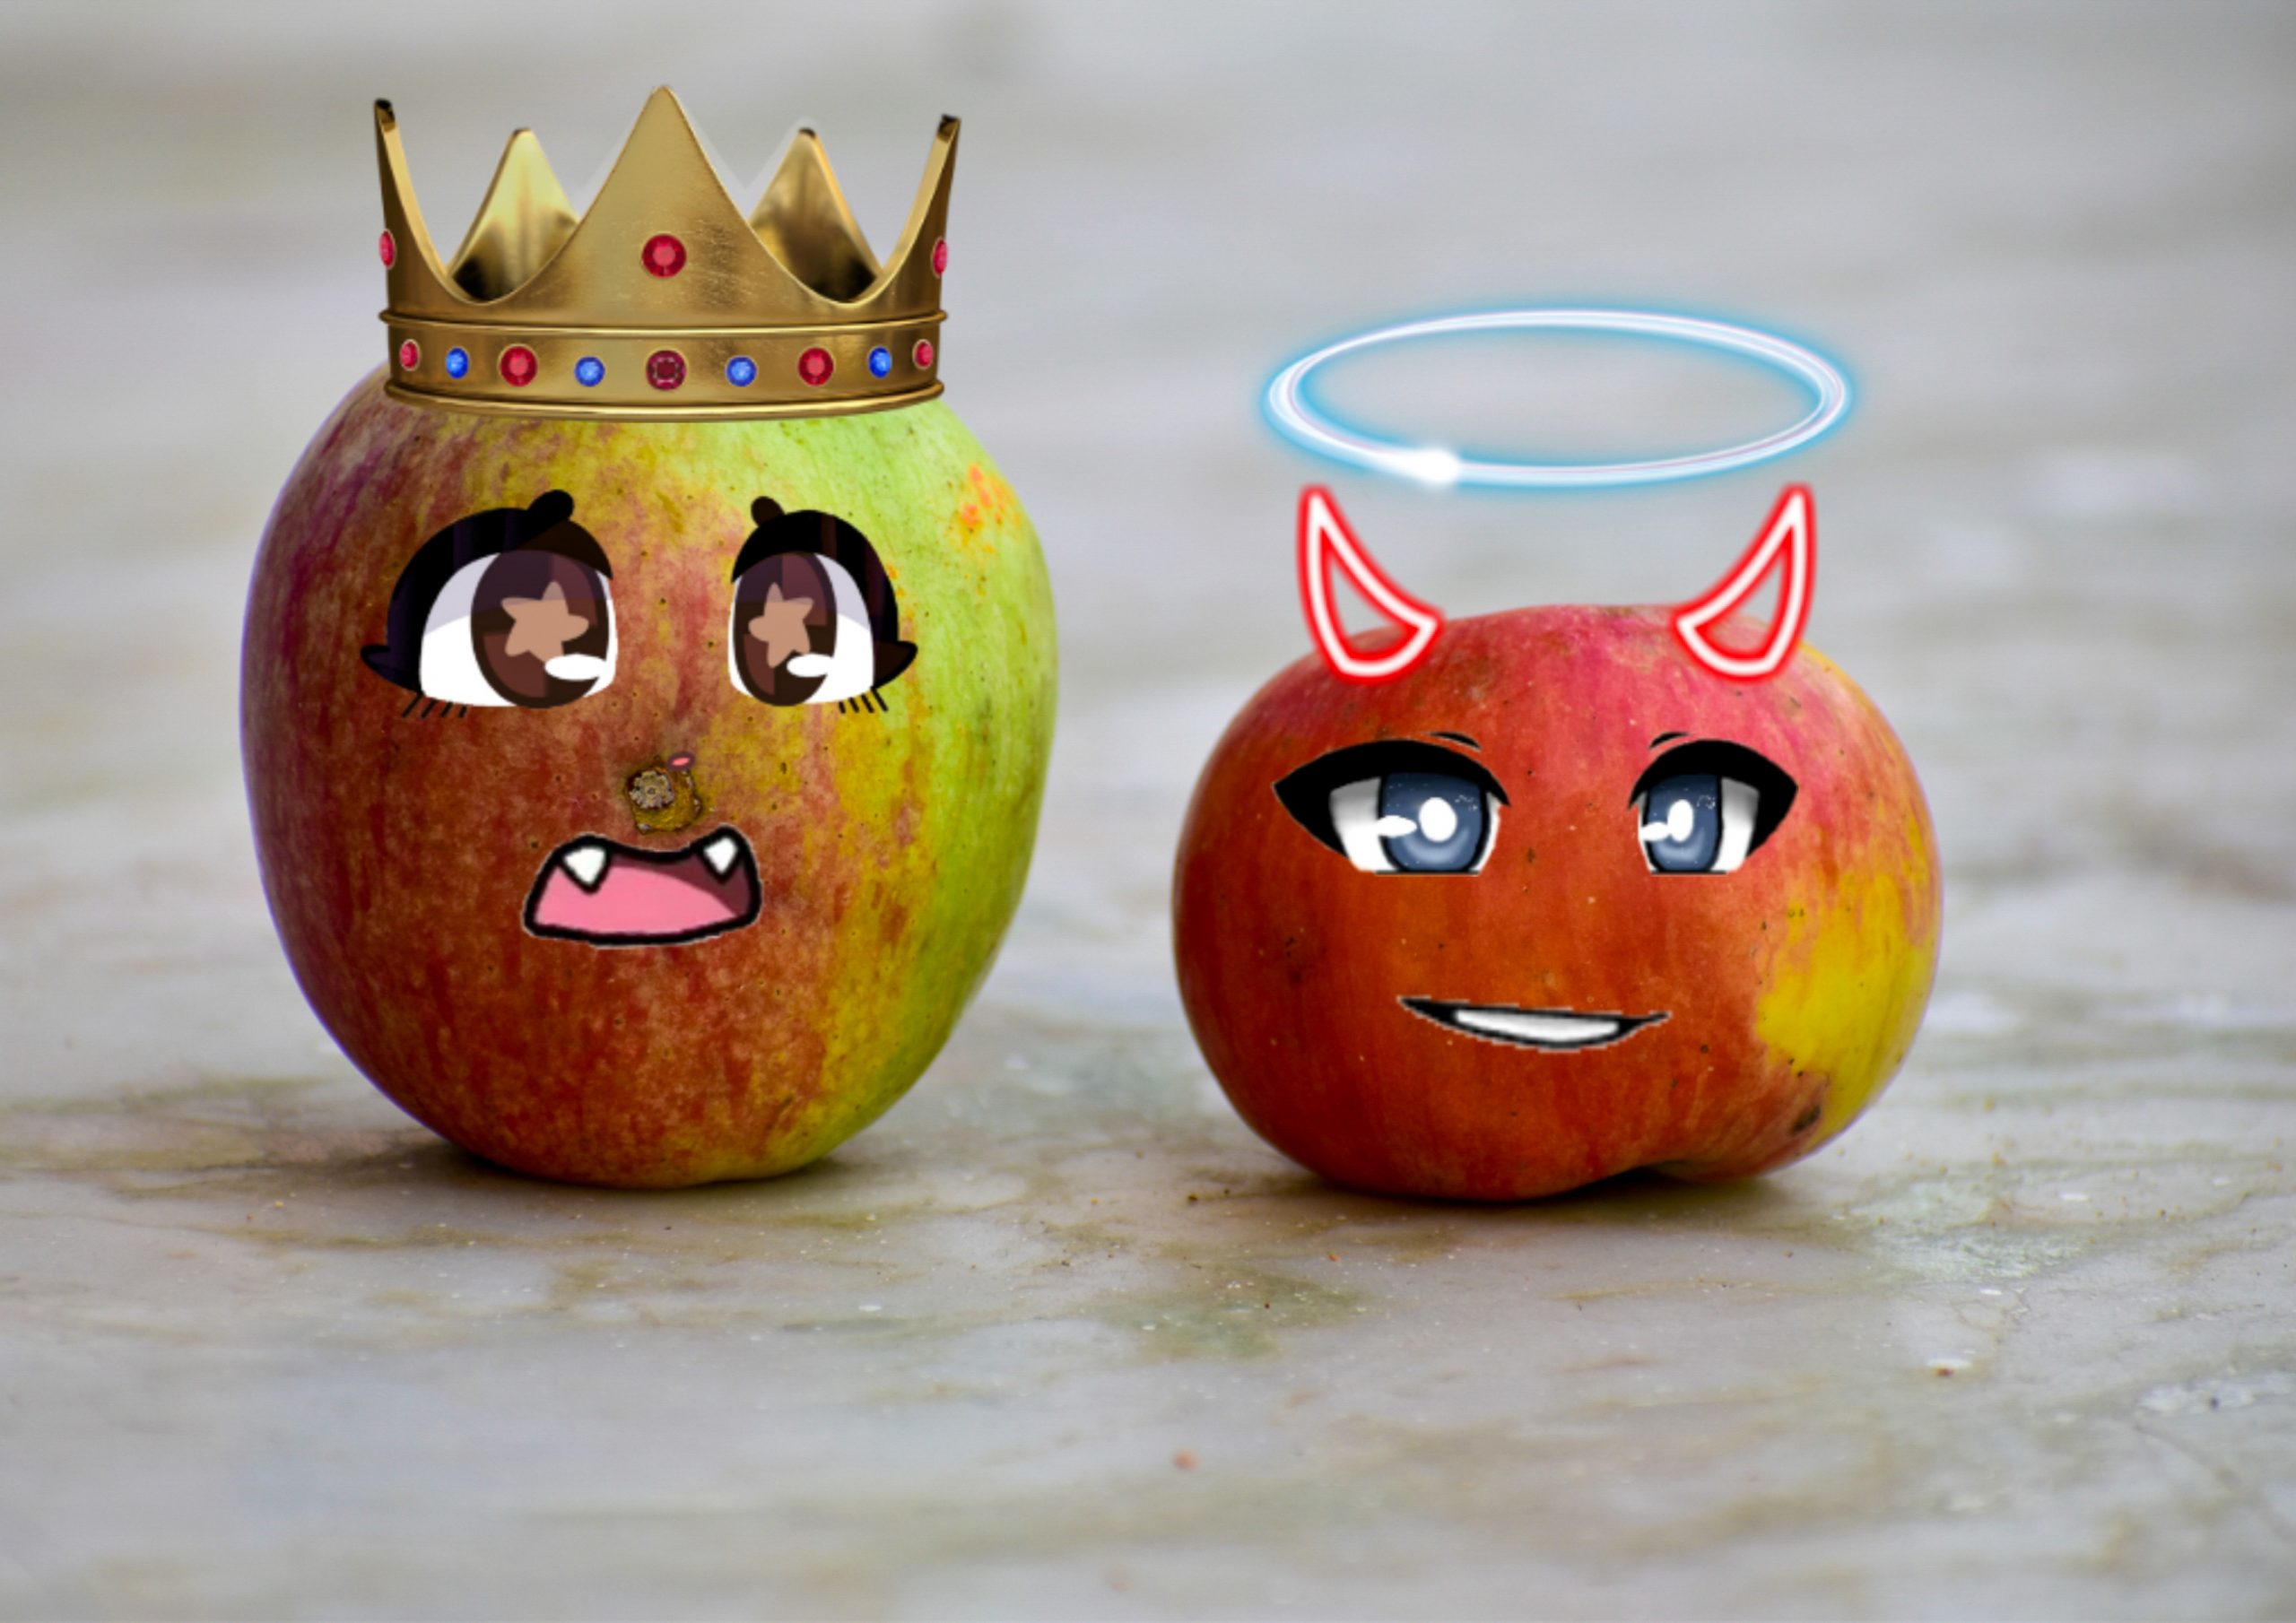 King and Queen of Apples